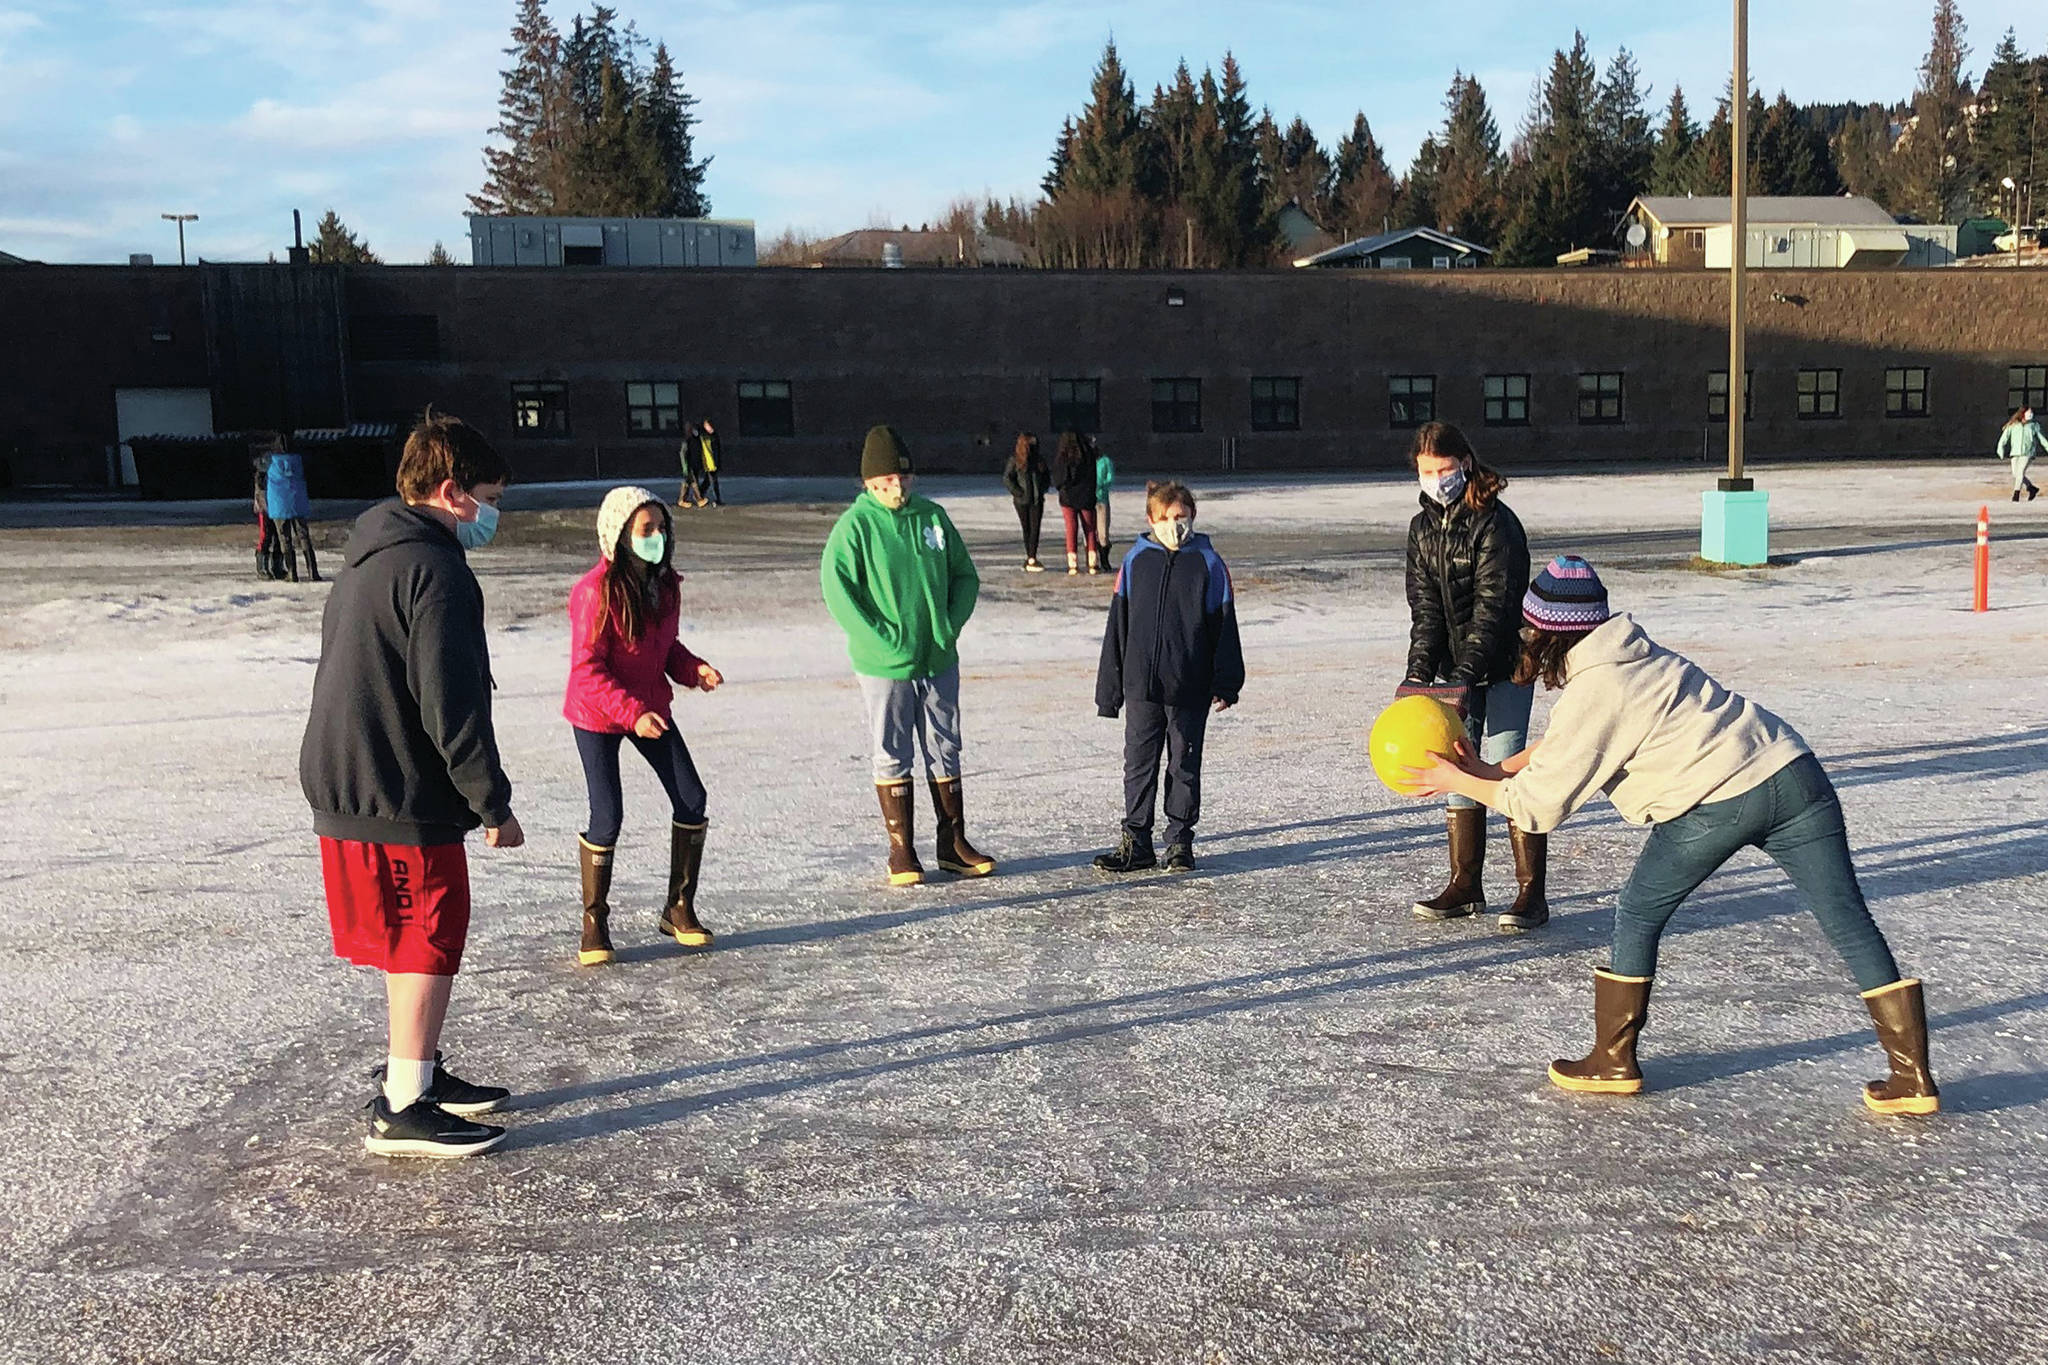 Students play during recess on Monday, Jan. 11, 2021 at West Homer Elementary School in Homer, Alaska. Elementary students were able to return to onsite schooling five days a week starting Monday. (Photo courtesy Joni Wise/West Homer Elementary School)